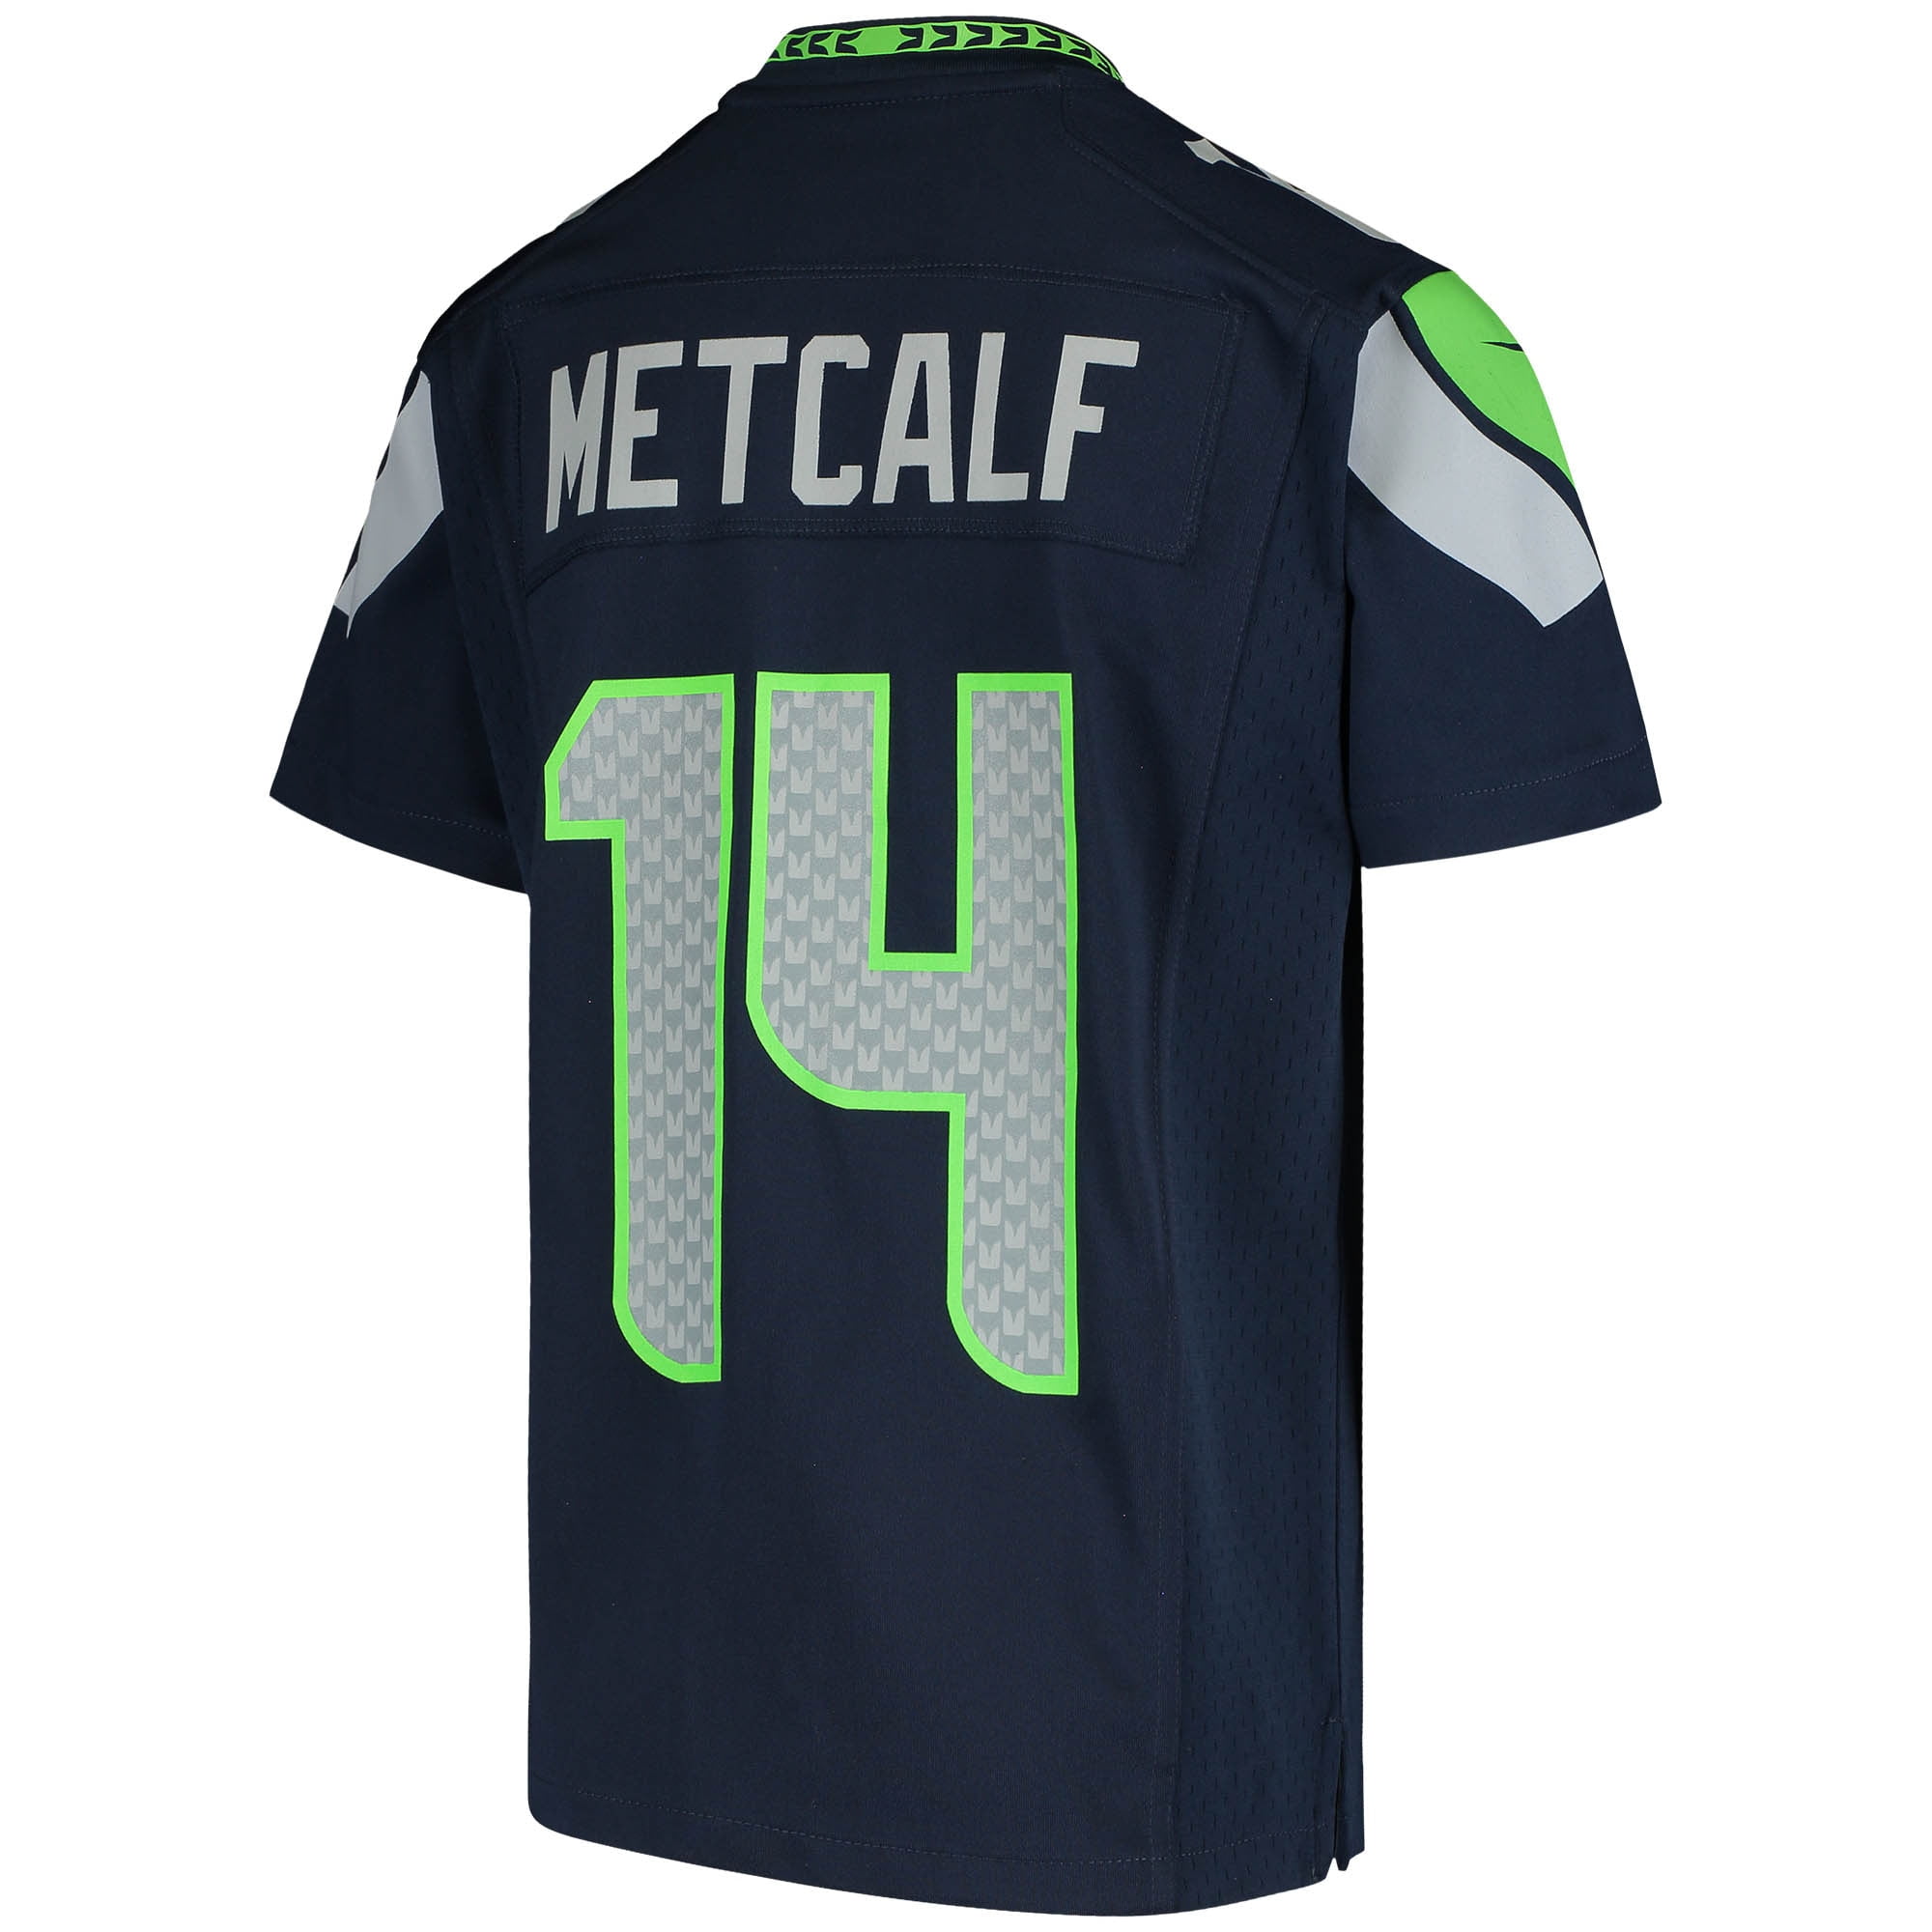 youth metcalf jersey